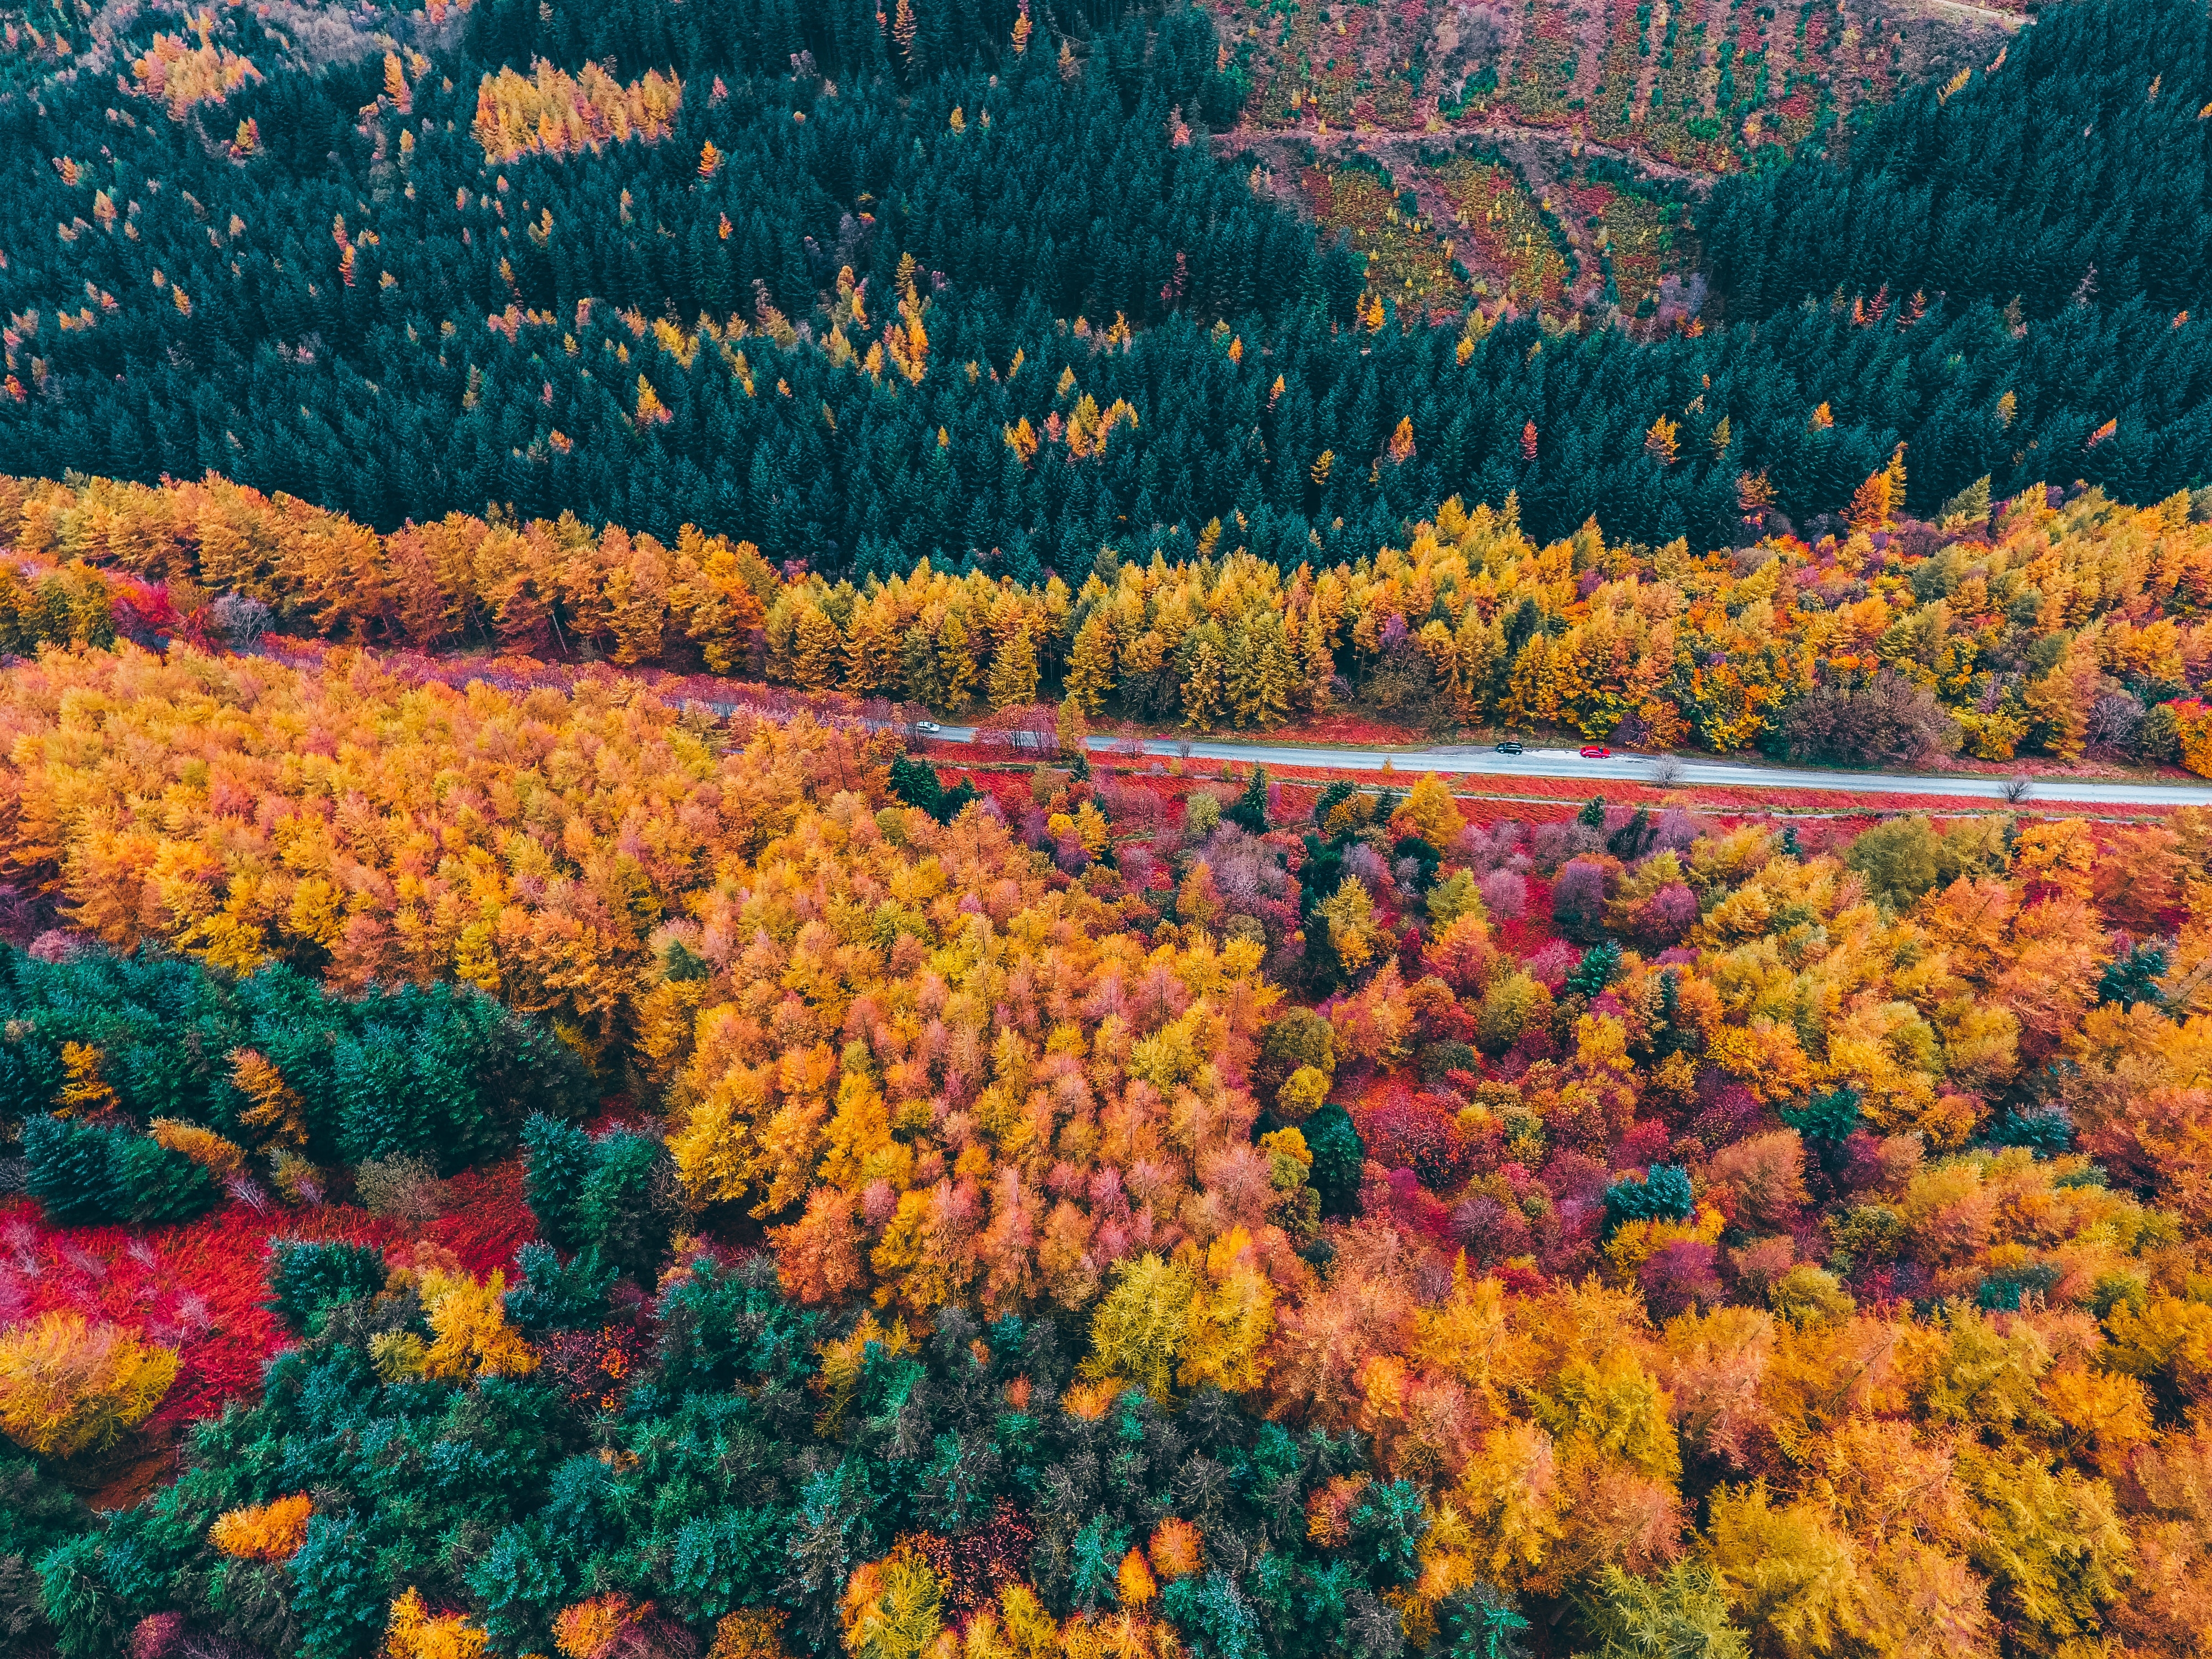 HD wallpaper, Scenery, Autumn Forest, Seasons, Colourful Trees, Aerial View, Landscape, Fall, Drone Photo